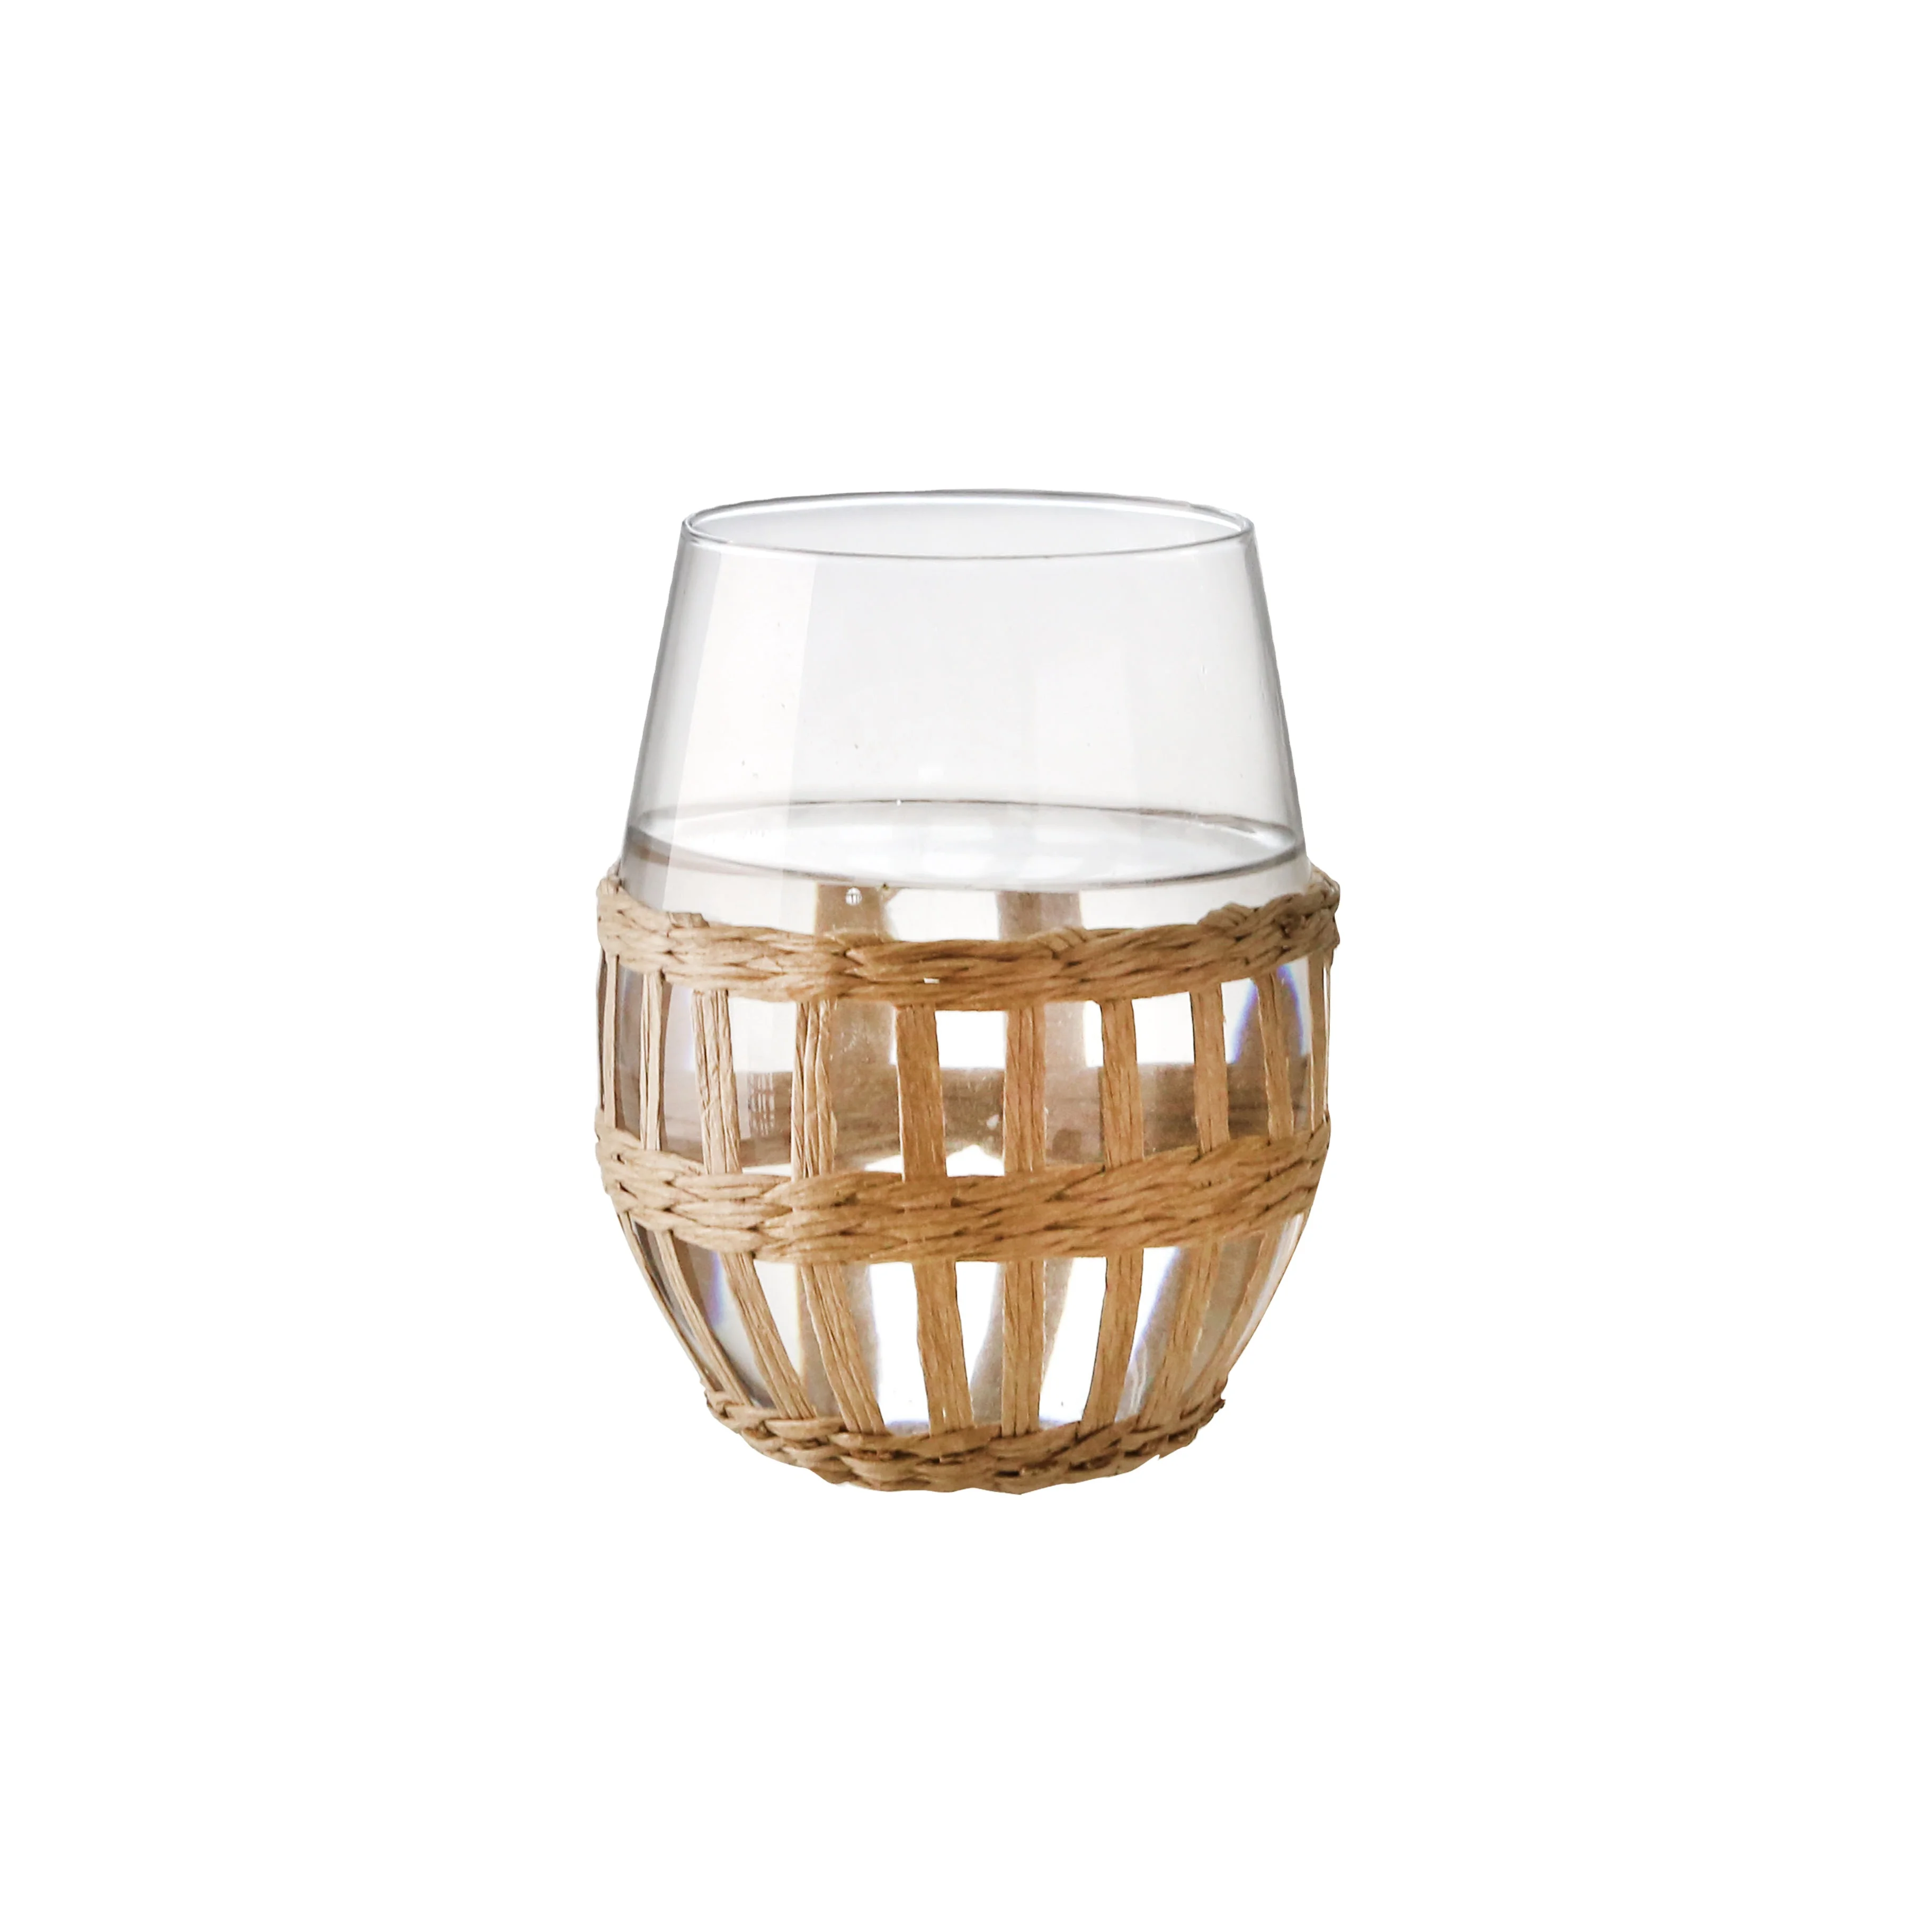 Glass Cup stemless Wine Glasses Hand Blown Glass Reusable Single Wall wine glasses Transparent for bar